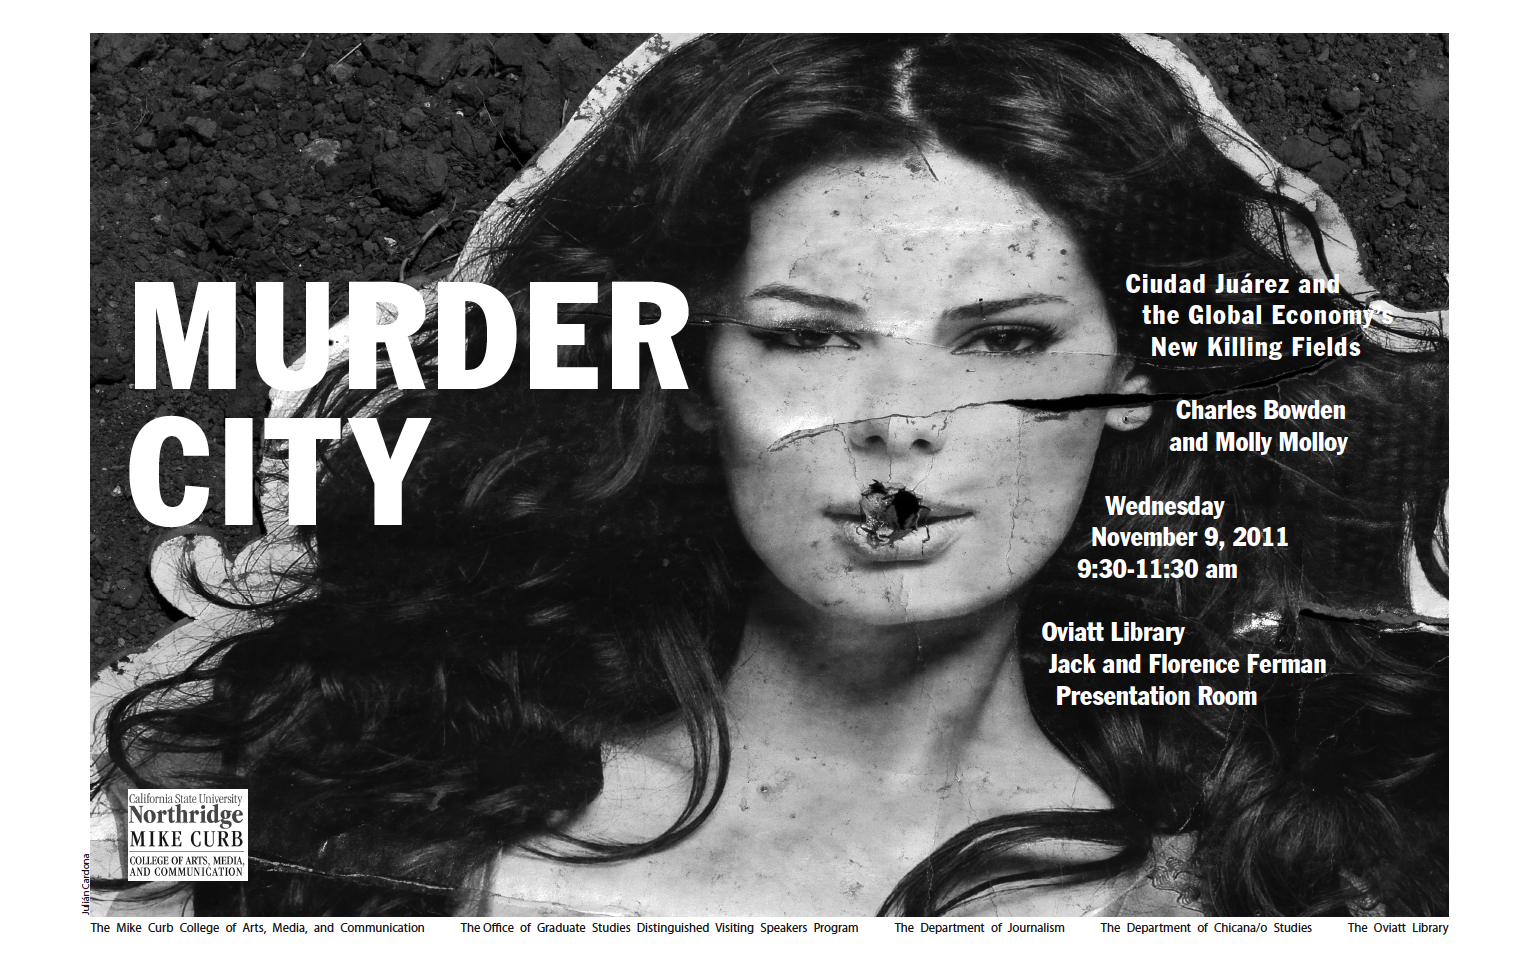 Live broadcast with Charles Bowden and Molly Molloy on "Murder City"